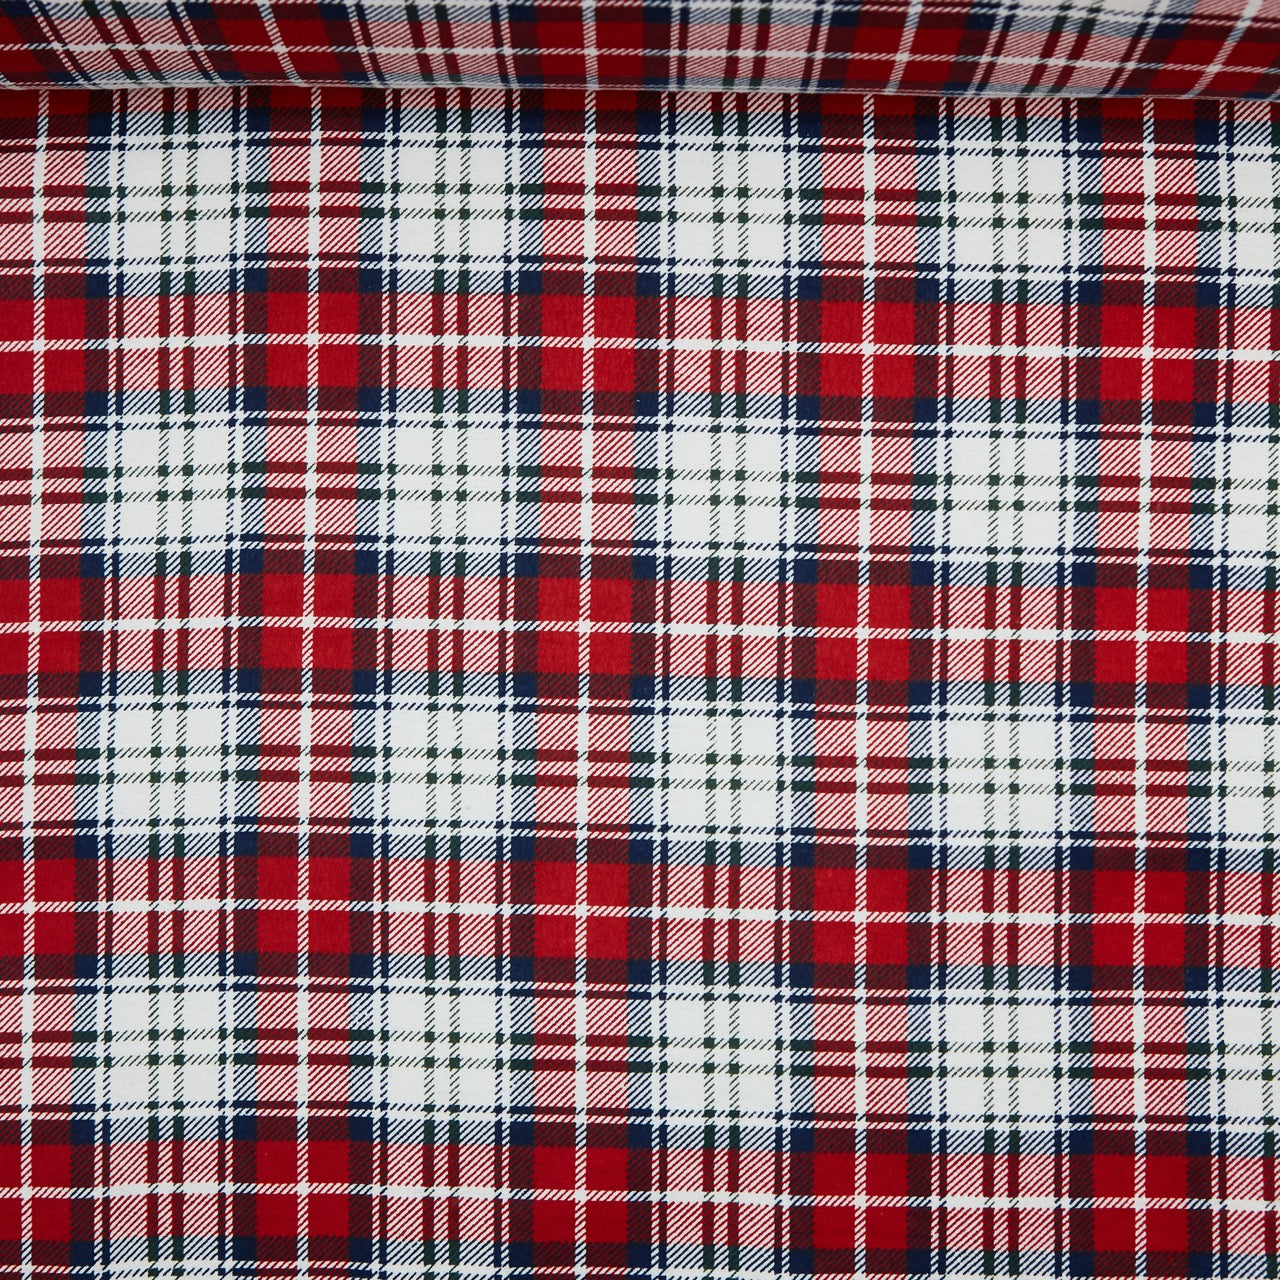 Flannel - Red / White Plaid